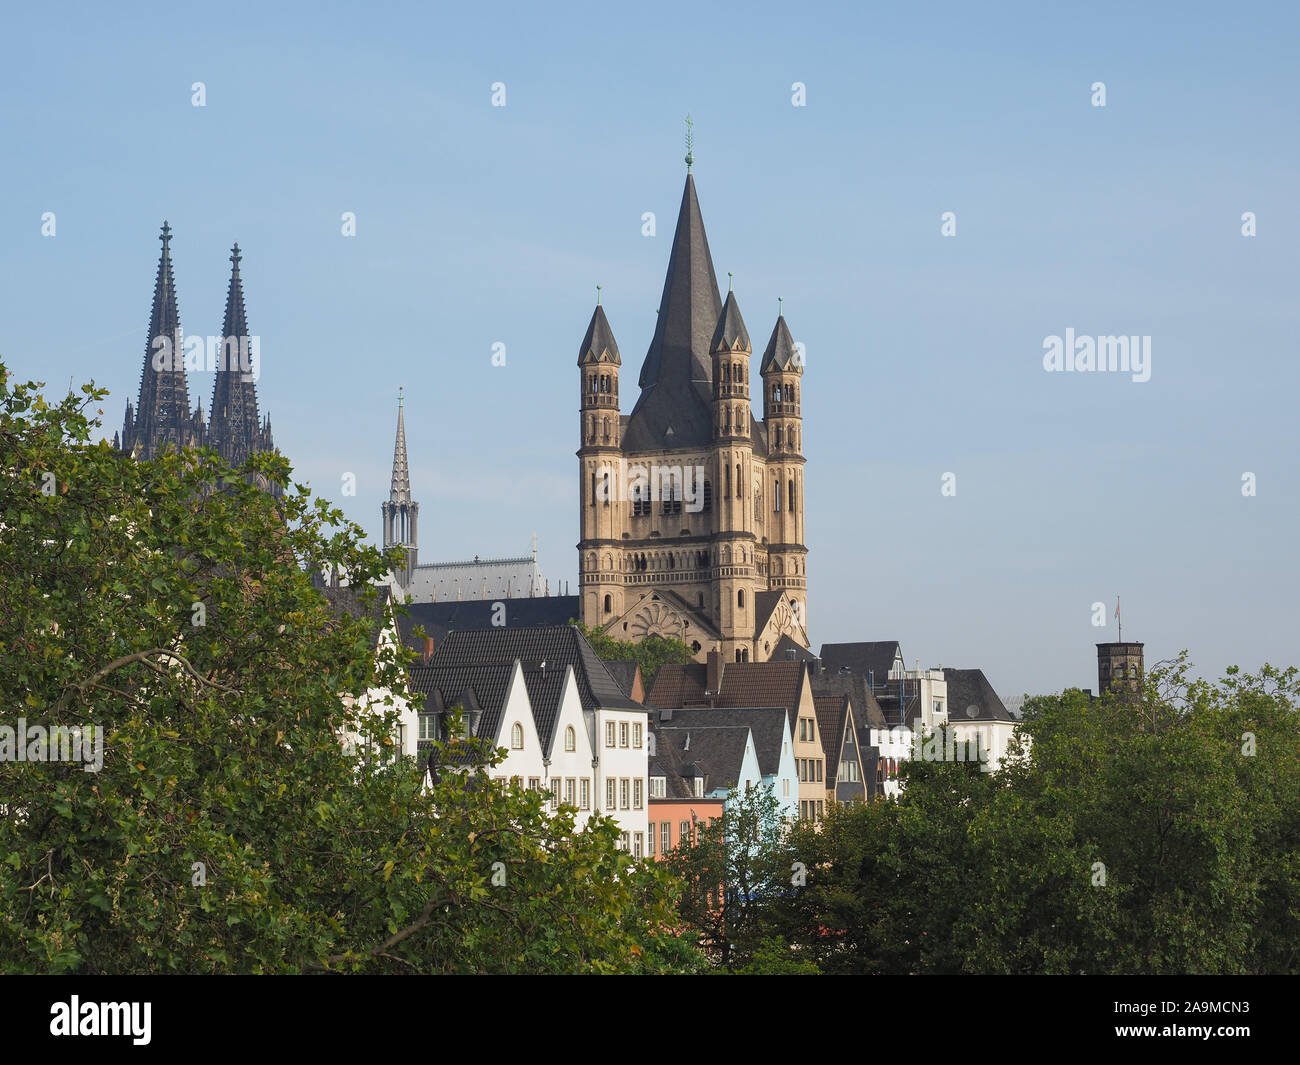 Altstadt (meaning Old Town) in Koeln, Germany Stock Photo